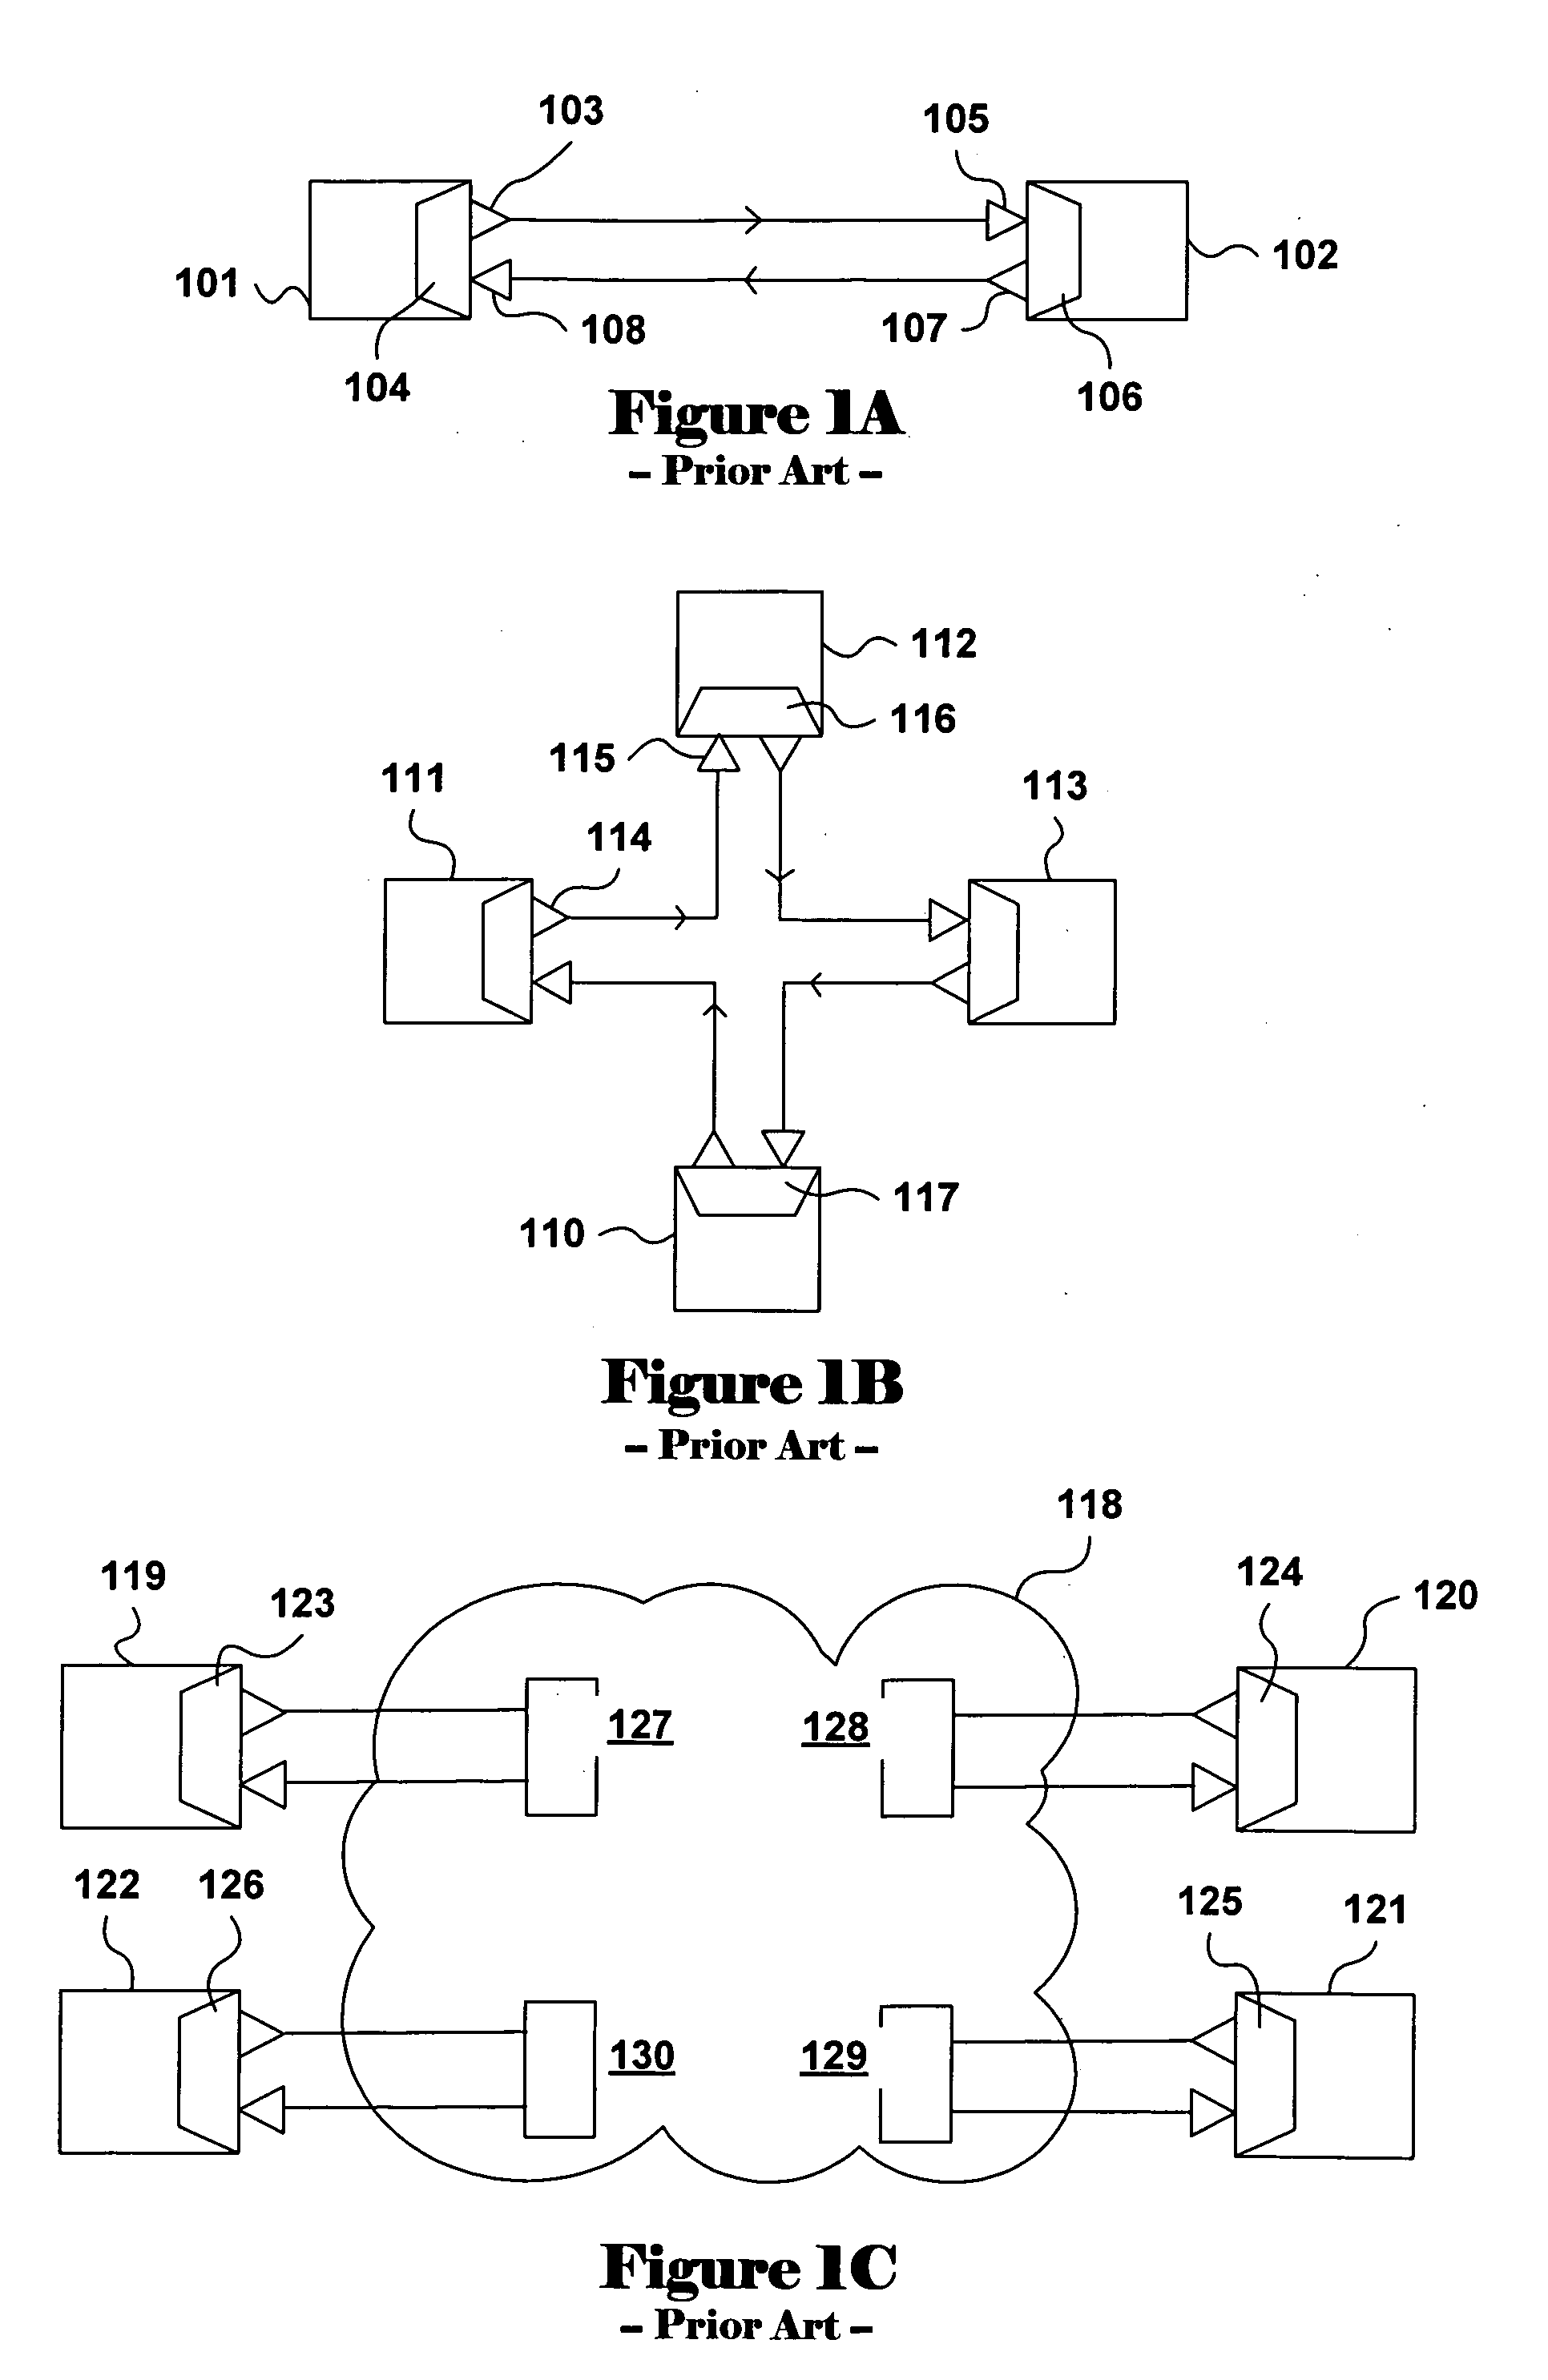 Integrated-circuit implementation of a storage-shelf router and a path controller card for combined use in high-availability mass-storage-device shelves that may be incorporated within disk arrays, and a storage-shelf-interface tunneling method and system